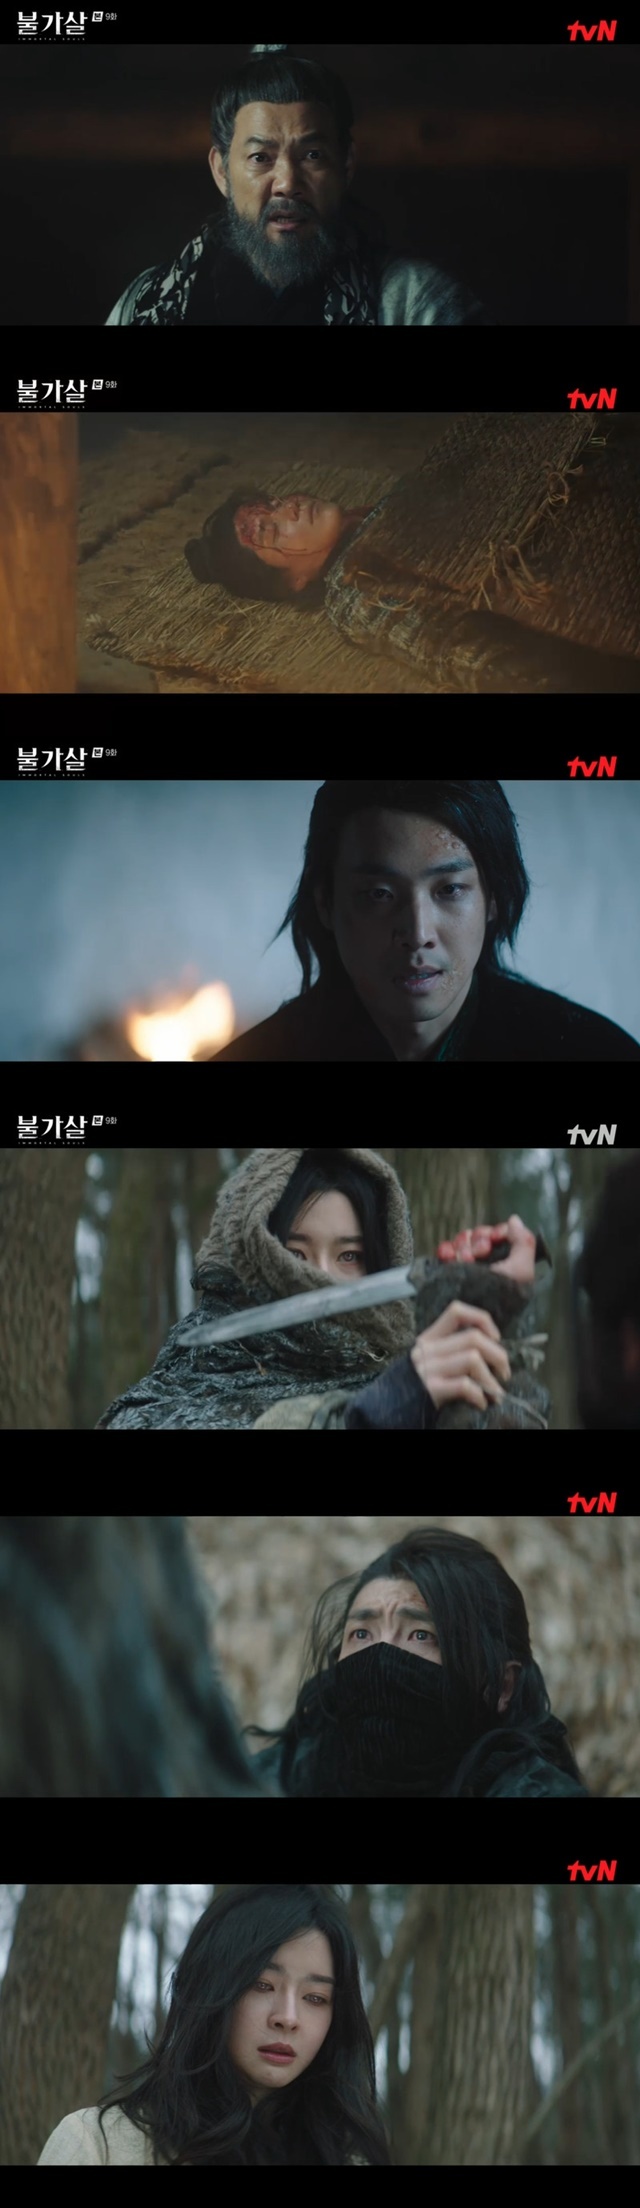 Lee Joons past life was revealed a thousand years ago.In the 9th episode of TVNs Saturday drama Irreplaceable You Sal, which aired on January 15, Seo Jae-won/director Jang Young-woo, Kwon So-ra, was the son of Kwon Hyung-sa, a 1,000-year-old son of Lee Joon.Min Sang-woon (Kwon Na-ra) informed Dan-hwal (Lee Jin-wook) that I did not kill your family 600 years ago, but I did it. Ok Eul-tae told Dan-hwal, Do not believe her.Youre cheating on yourself now, and its so pathetic, he said to Min Sang-woon.Then, Ok Eul-tae threatened Min Sang-woons neck, and Dan-hwal injected Ok Eul-tae with medicine and warned him, I will go back to check and wait.Dan-hwal escaped from Ok-tae with the help of Min Sang-woon and Kwon Hyung-sa.Ok Eul-tae, who was suffering alone, recalled his past life a thousand years ago.His father was Kwon, and Kwon said that he would take his second son only by opening the door. My eldest son was also a madness that caused my mother to die in a coughing cough.Im glad my second wife had a son, though. The second is like me. Strong and dignified.